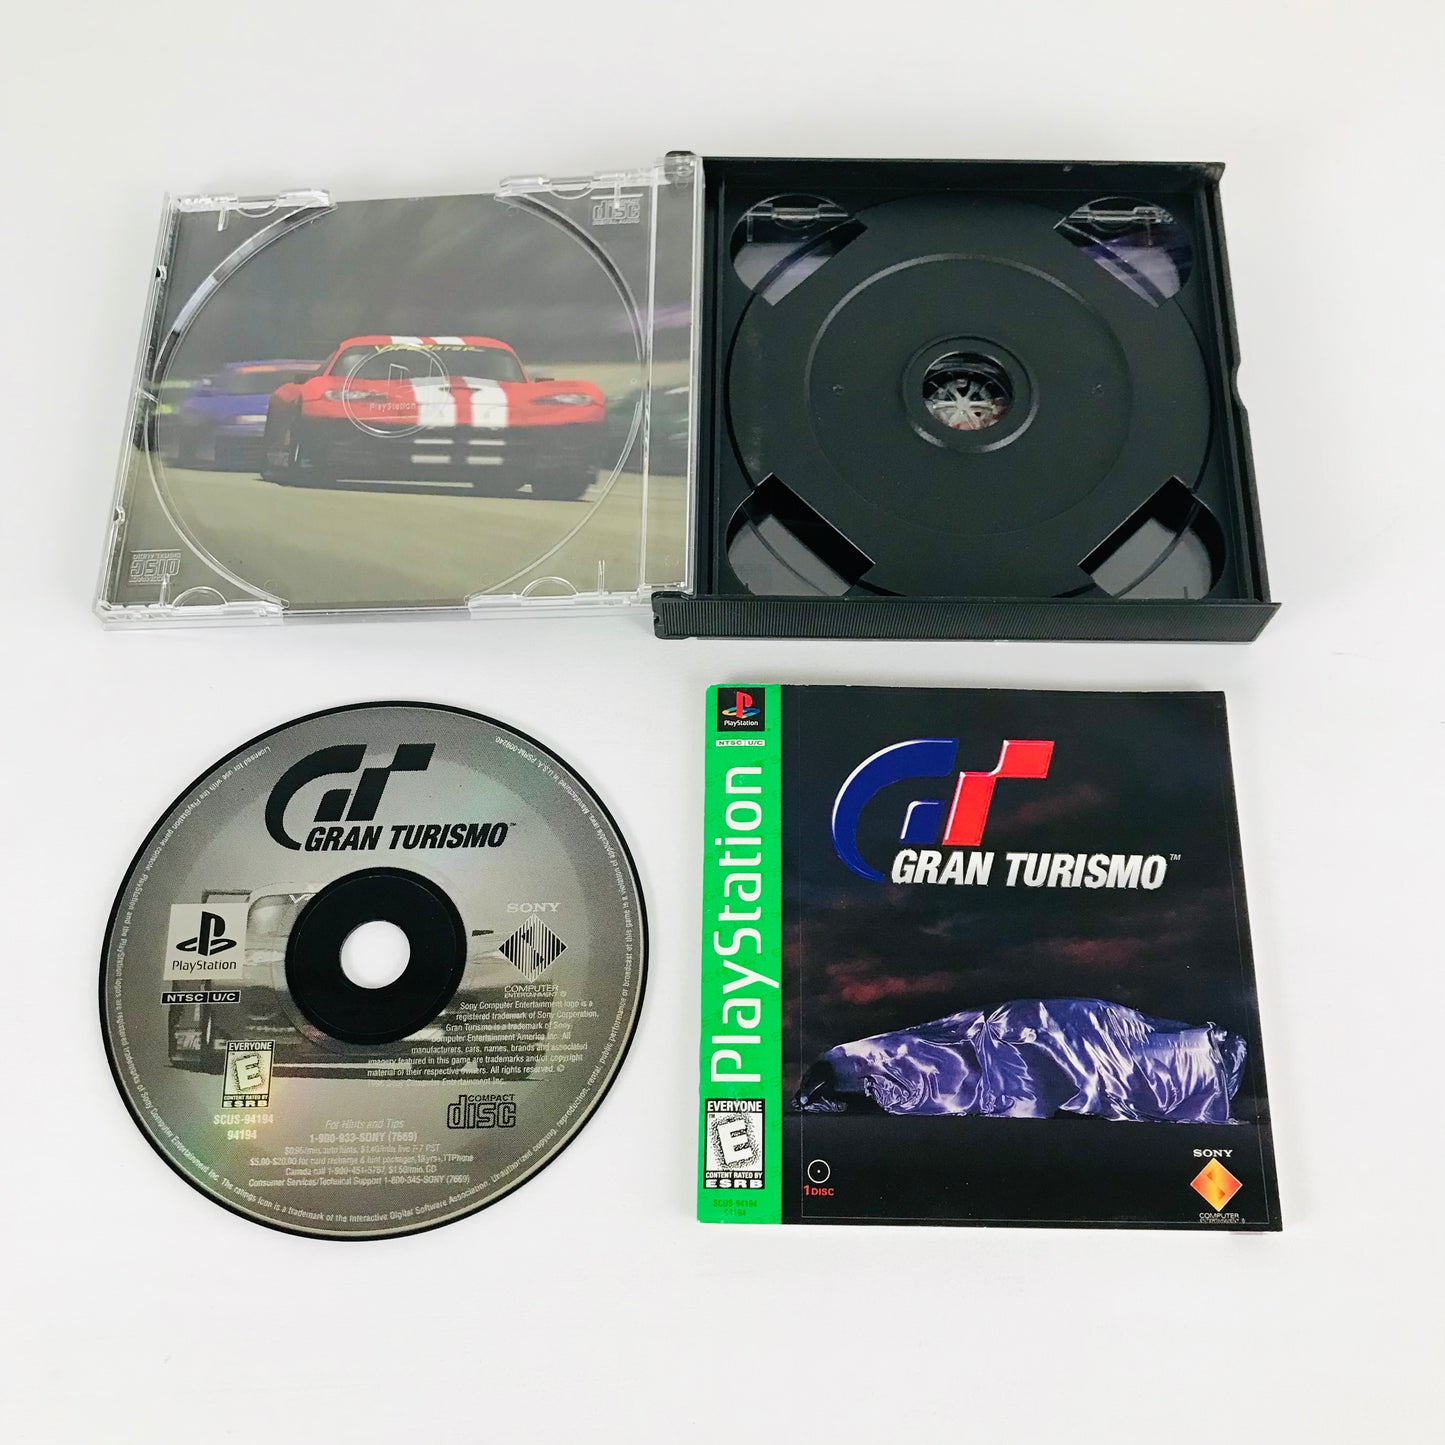 The jewel case, game disc, and instructions booklet for the Sony PS1 game, "Gran Turismo".